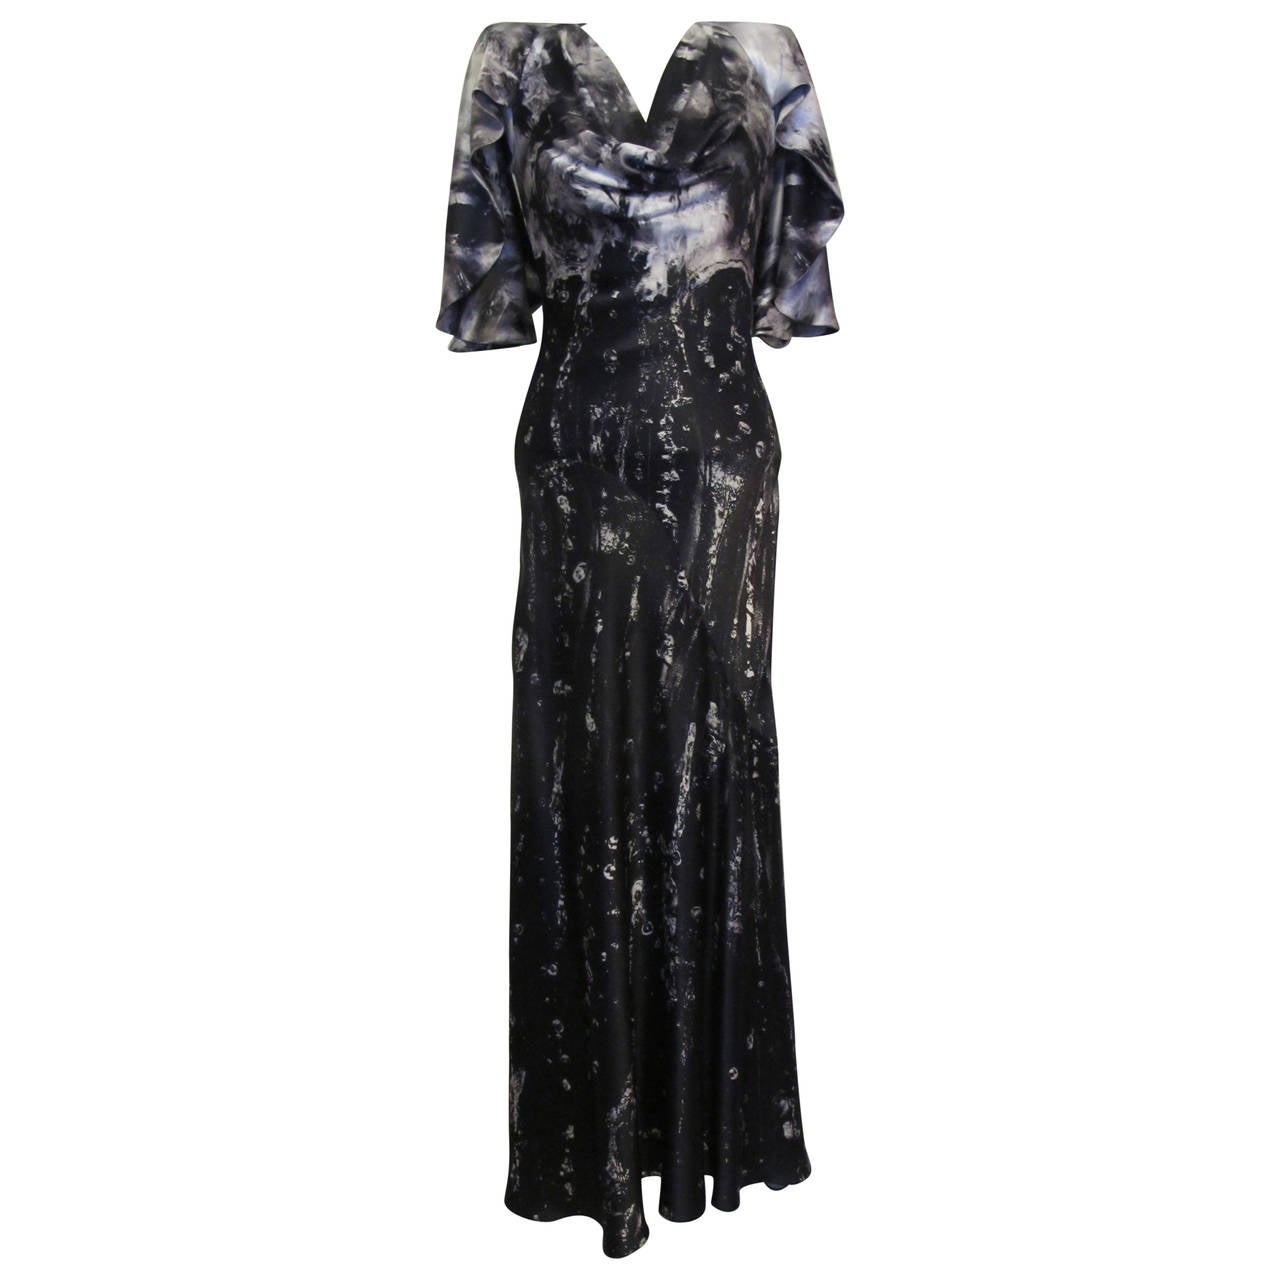 2010 Alexander McQueen Collectable Silk Evening Gown For Sale